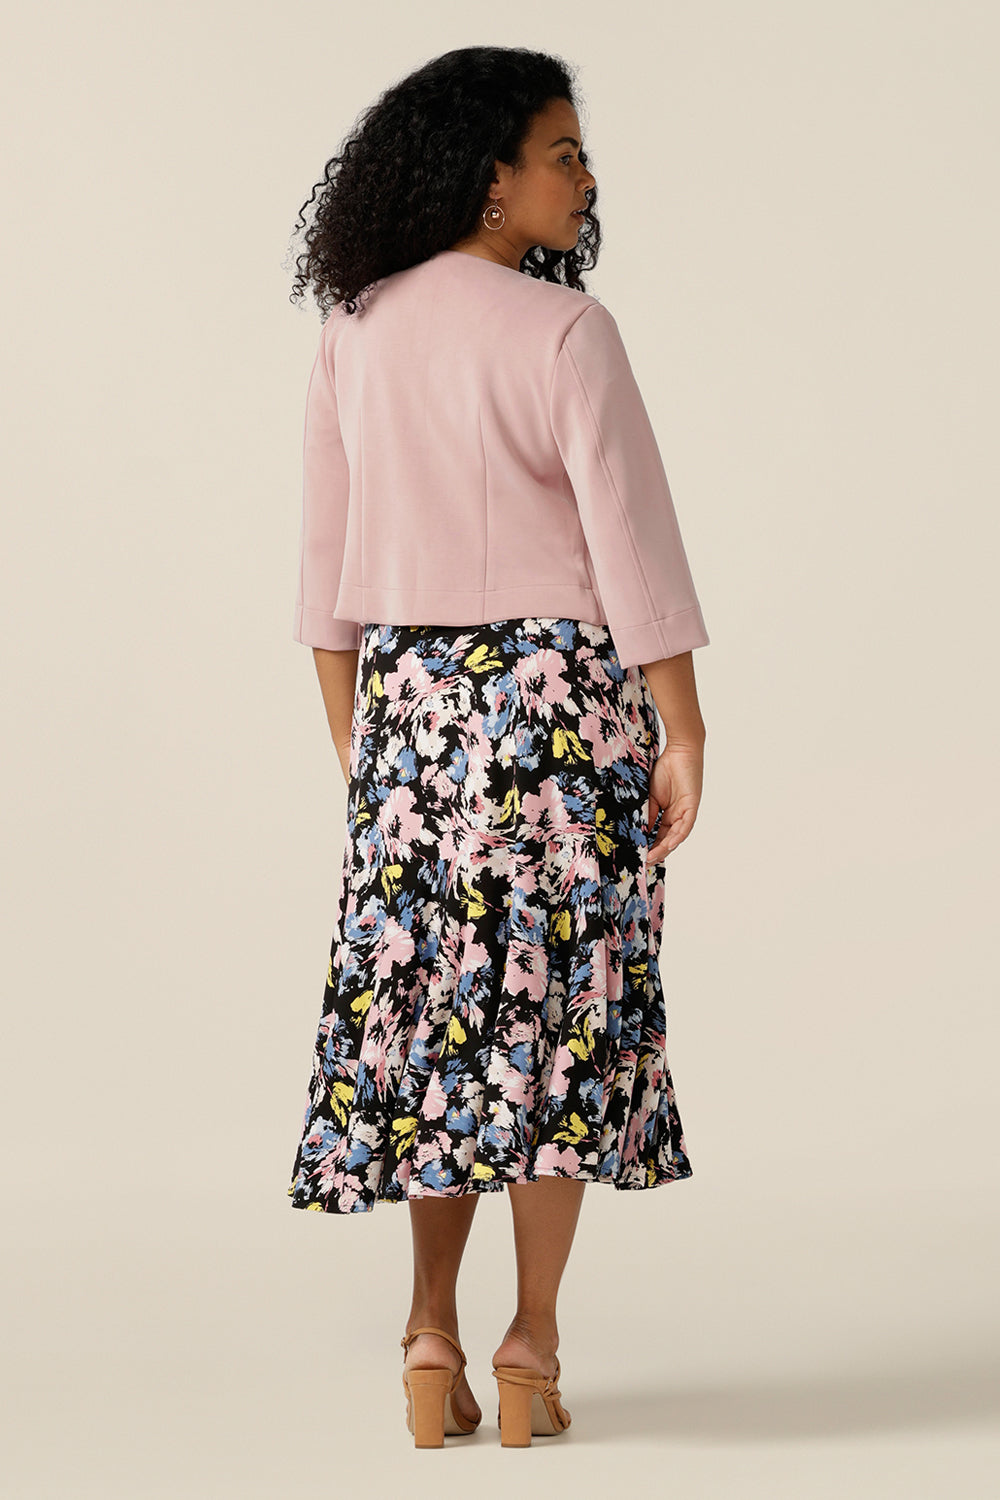 A size 12 curvy woman wears an open-front, collarless jacket with 3/4 sleeves. Made from pink modal jersey, this comfortable jacket is sustainably-made using natural fibres and eco-conscious production. A good sustainable corporate jacket, the Rainy Jacket is worn with a vintage floral print jersey dress.